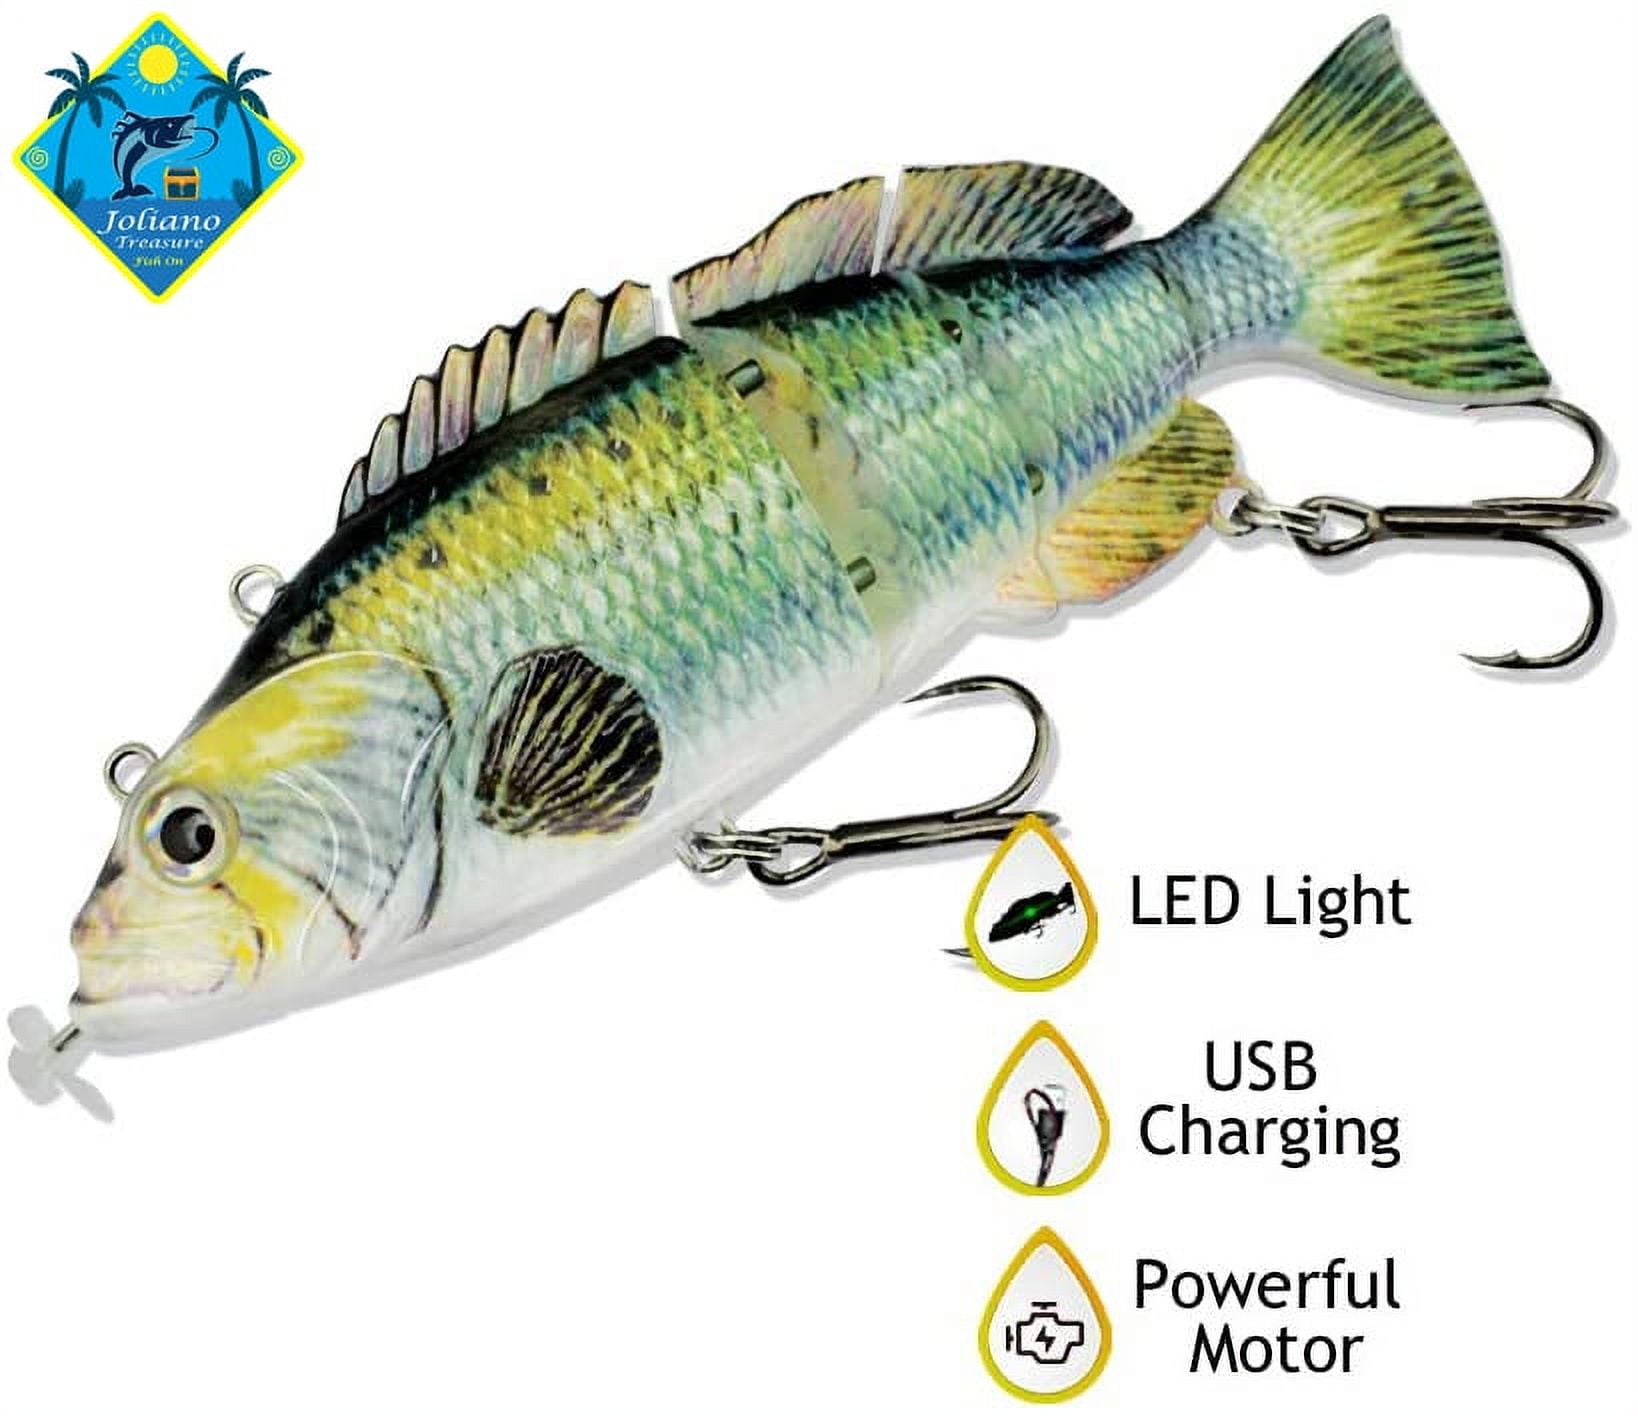 Joliano Robotic Swimming Lure Auto Electric Lure USB Rechargeable Swimbait  Multi Jointed Segment Fishing Lure LED Light 